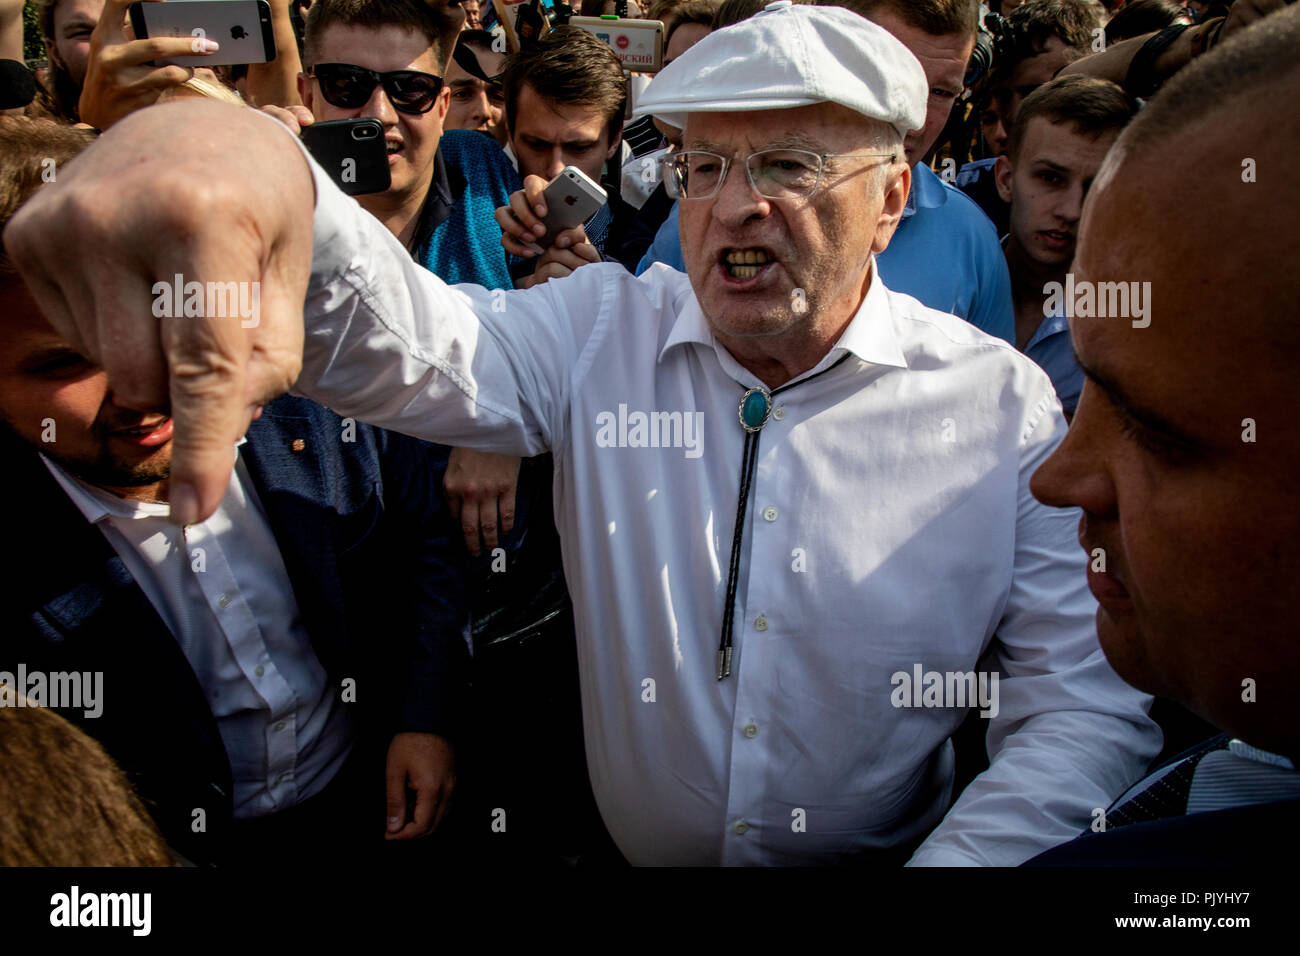 Moscow, Russia. 9th September 2018. Vladimir Zhirinovsky, ultranationalist Liberal Democratic Party leader, center, speaks with protesters during a rally on Pushkinskaya square in Moscow, Russia Credit: Nikolay Vinokurov/Alamy Live News Stock Photo